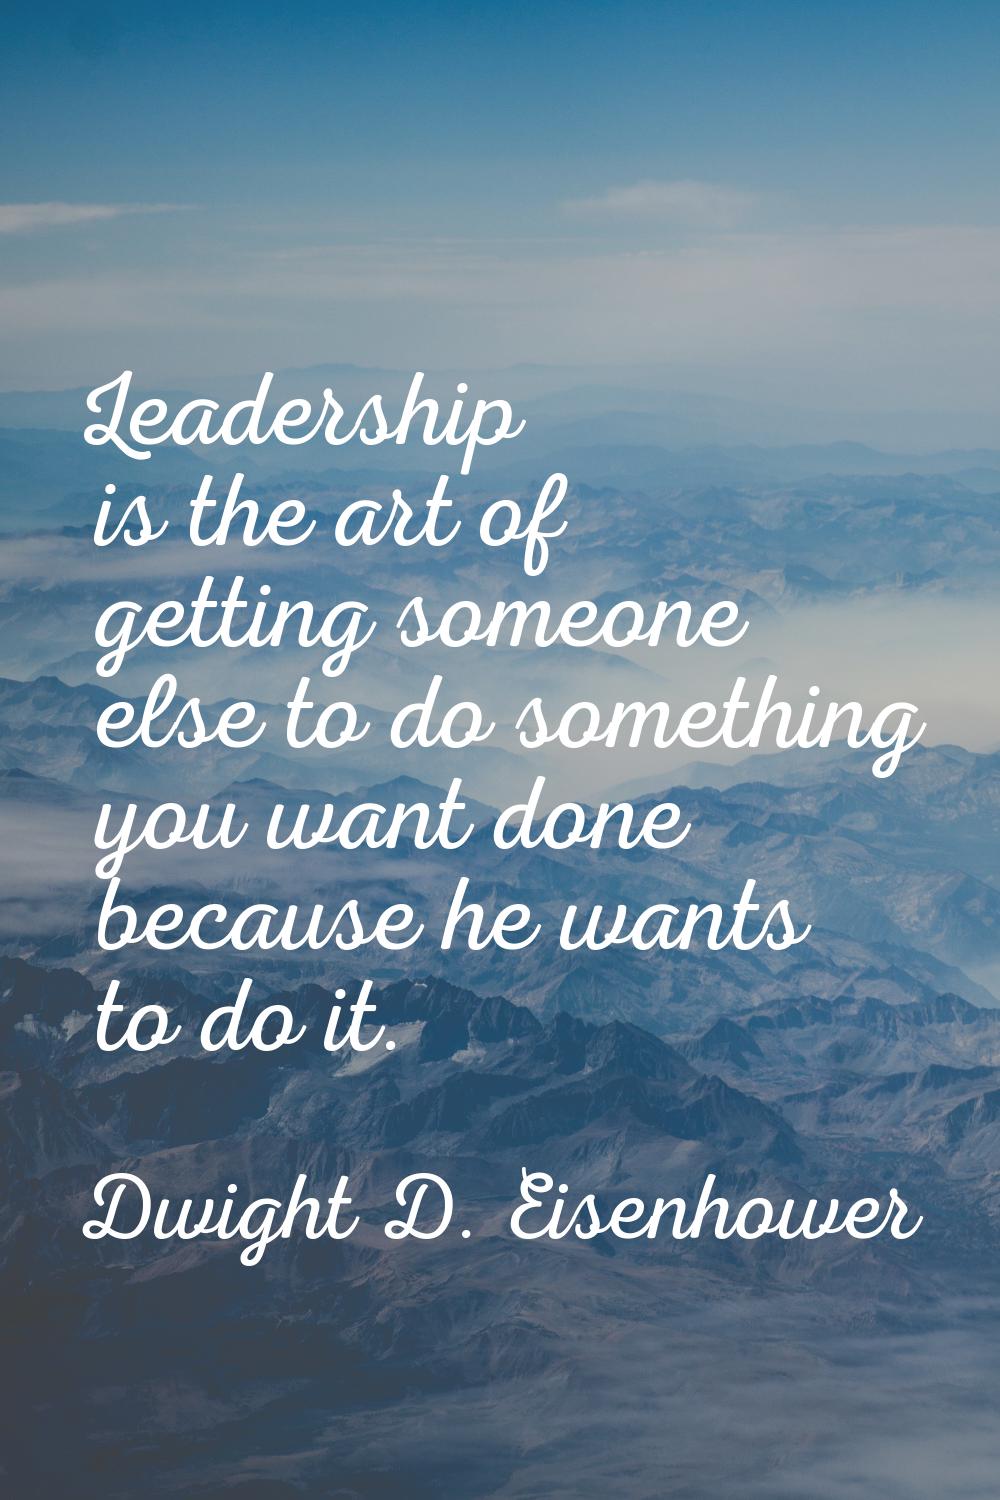 Leadership is the art of getting someone else to do something you want done because he wants to do 